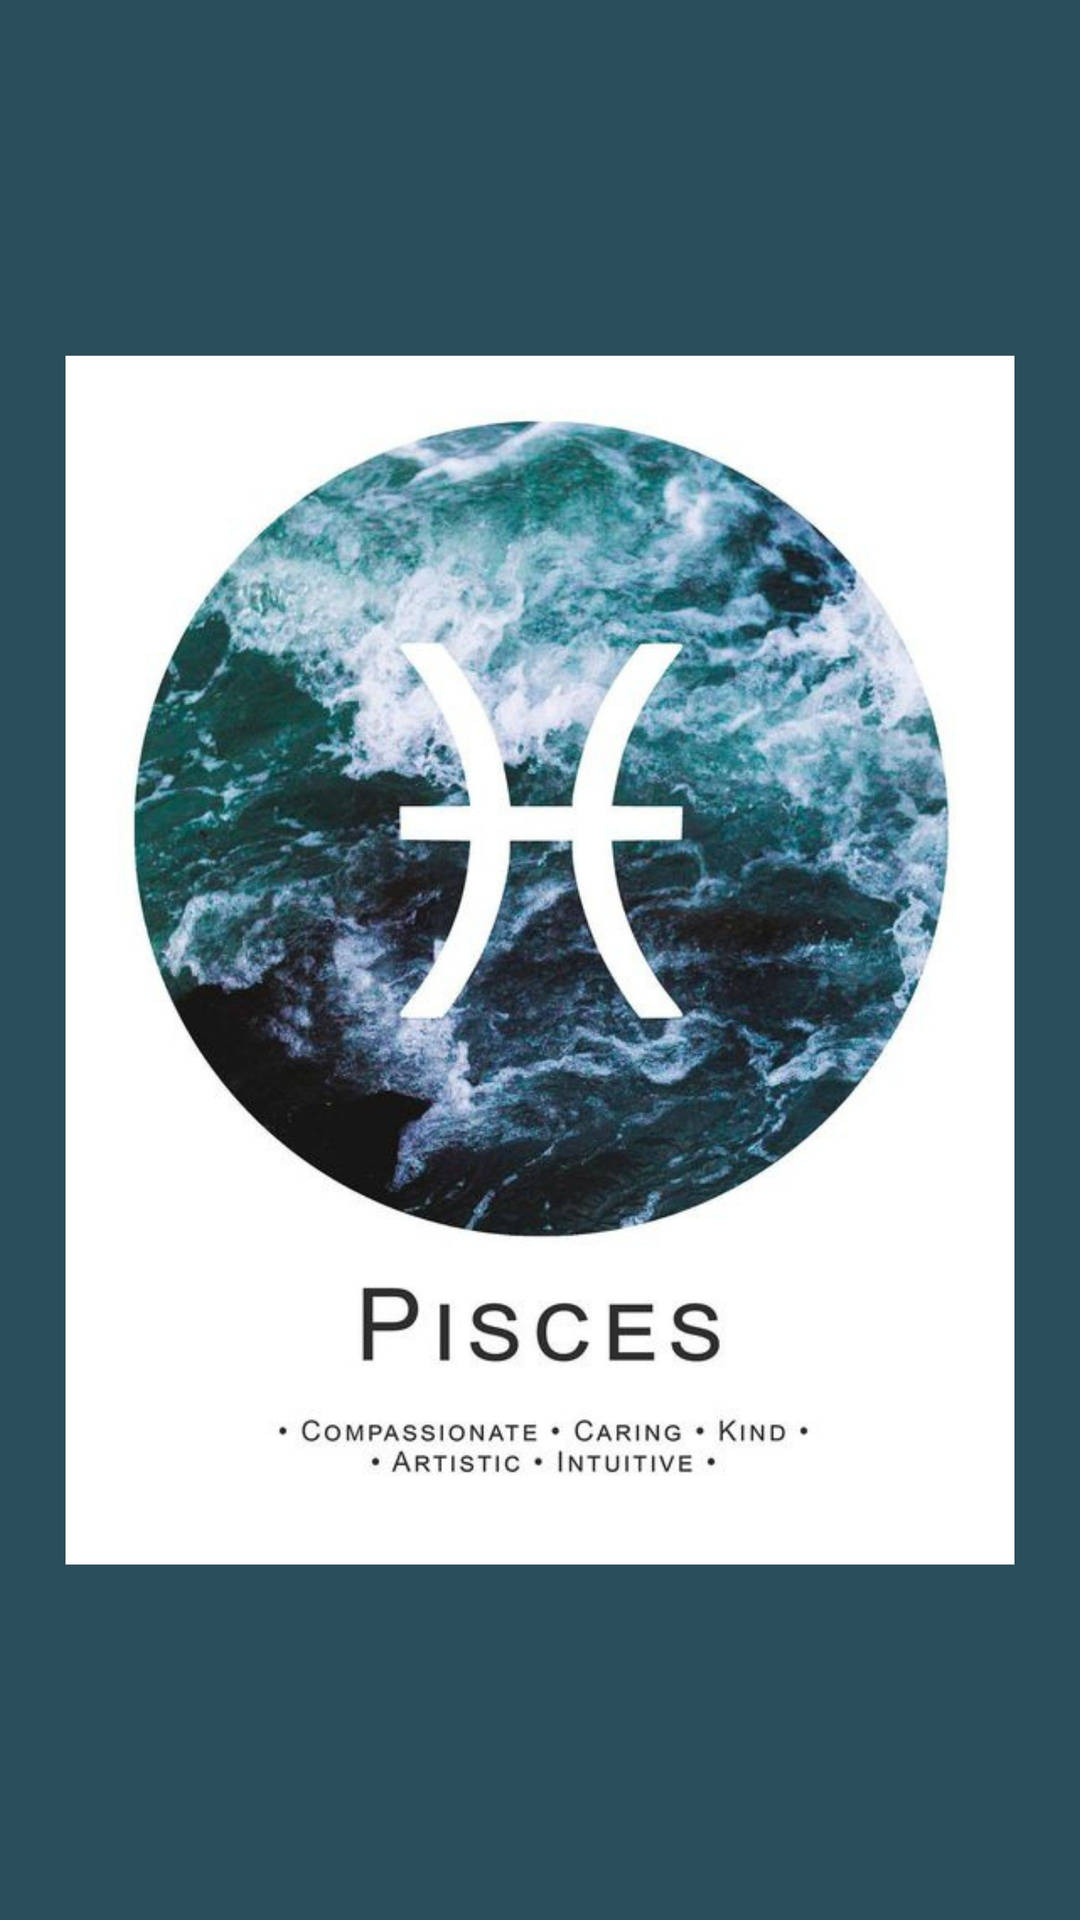 Pisces Ocean Symbol And Text Background